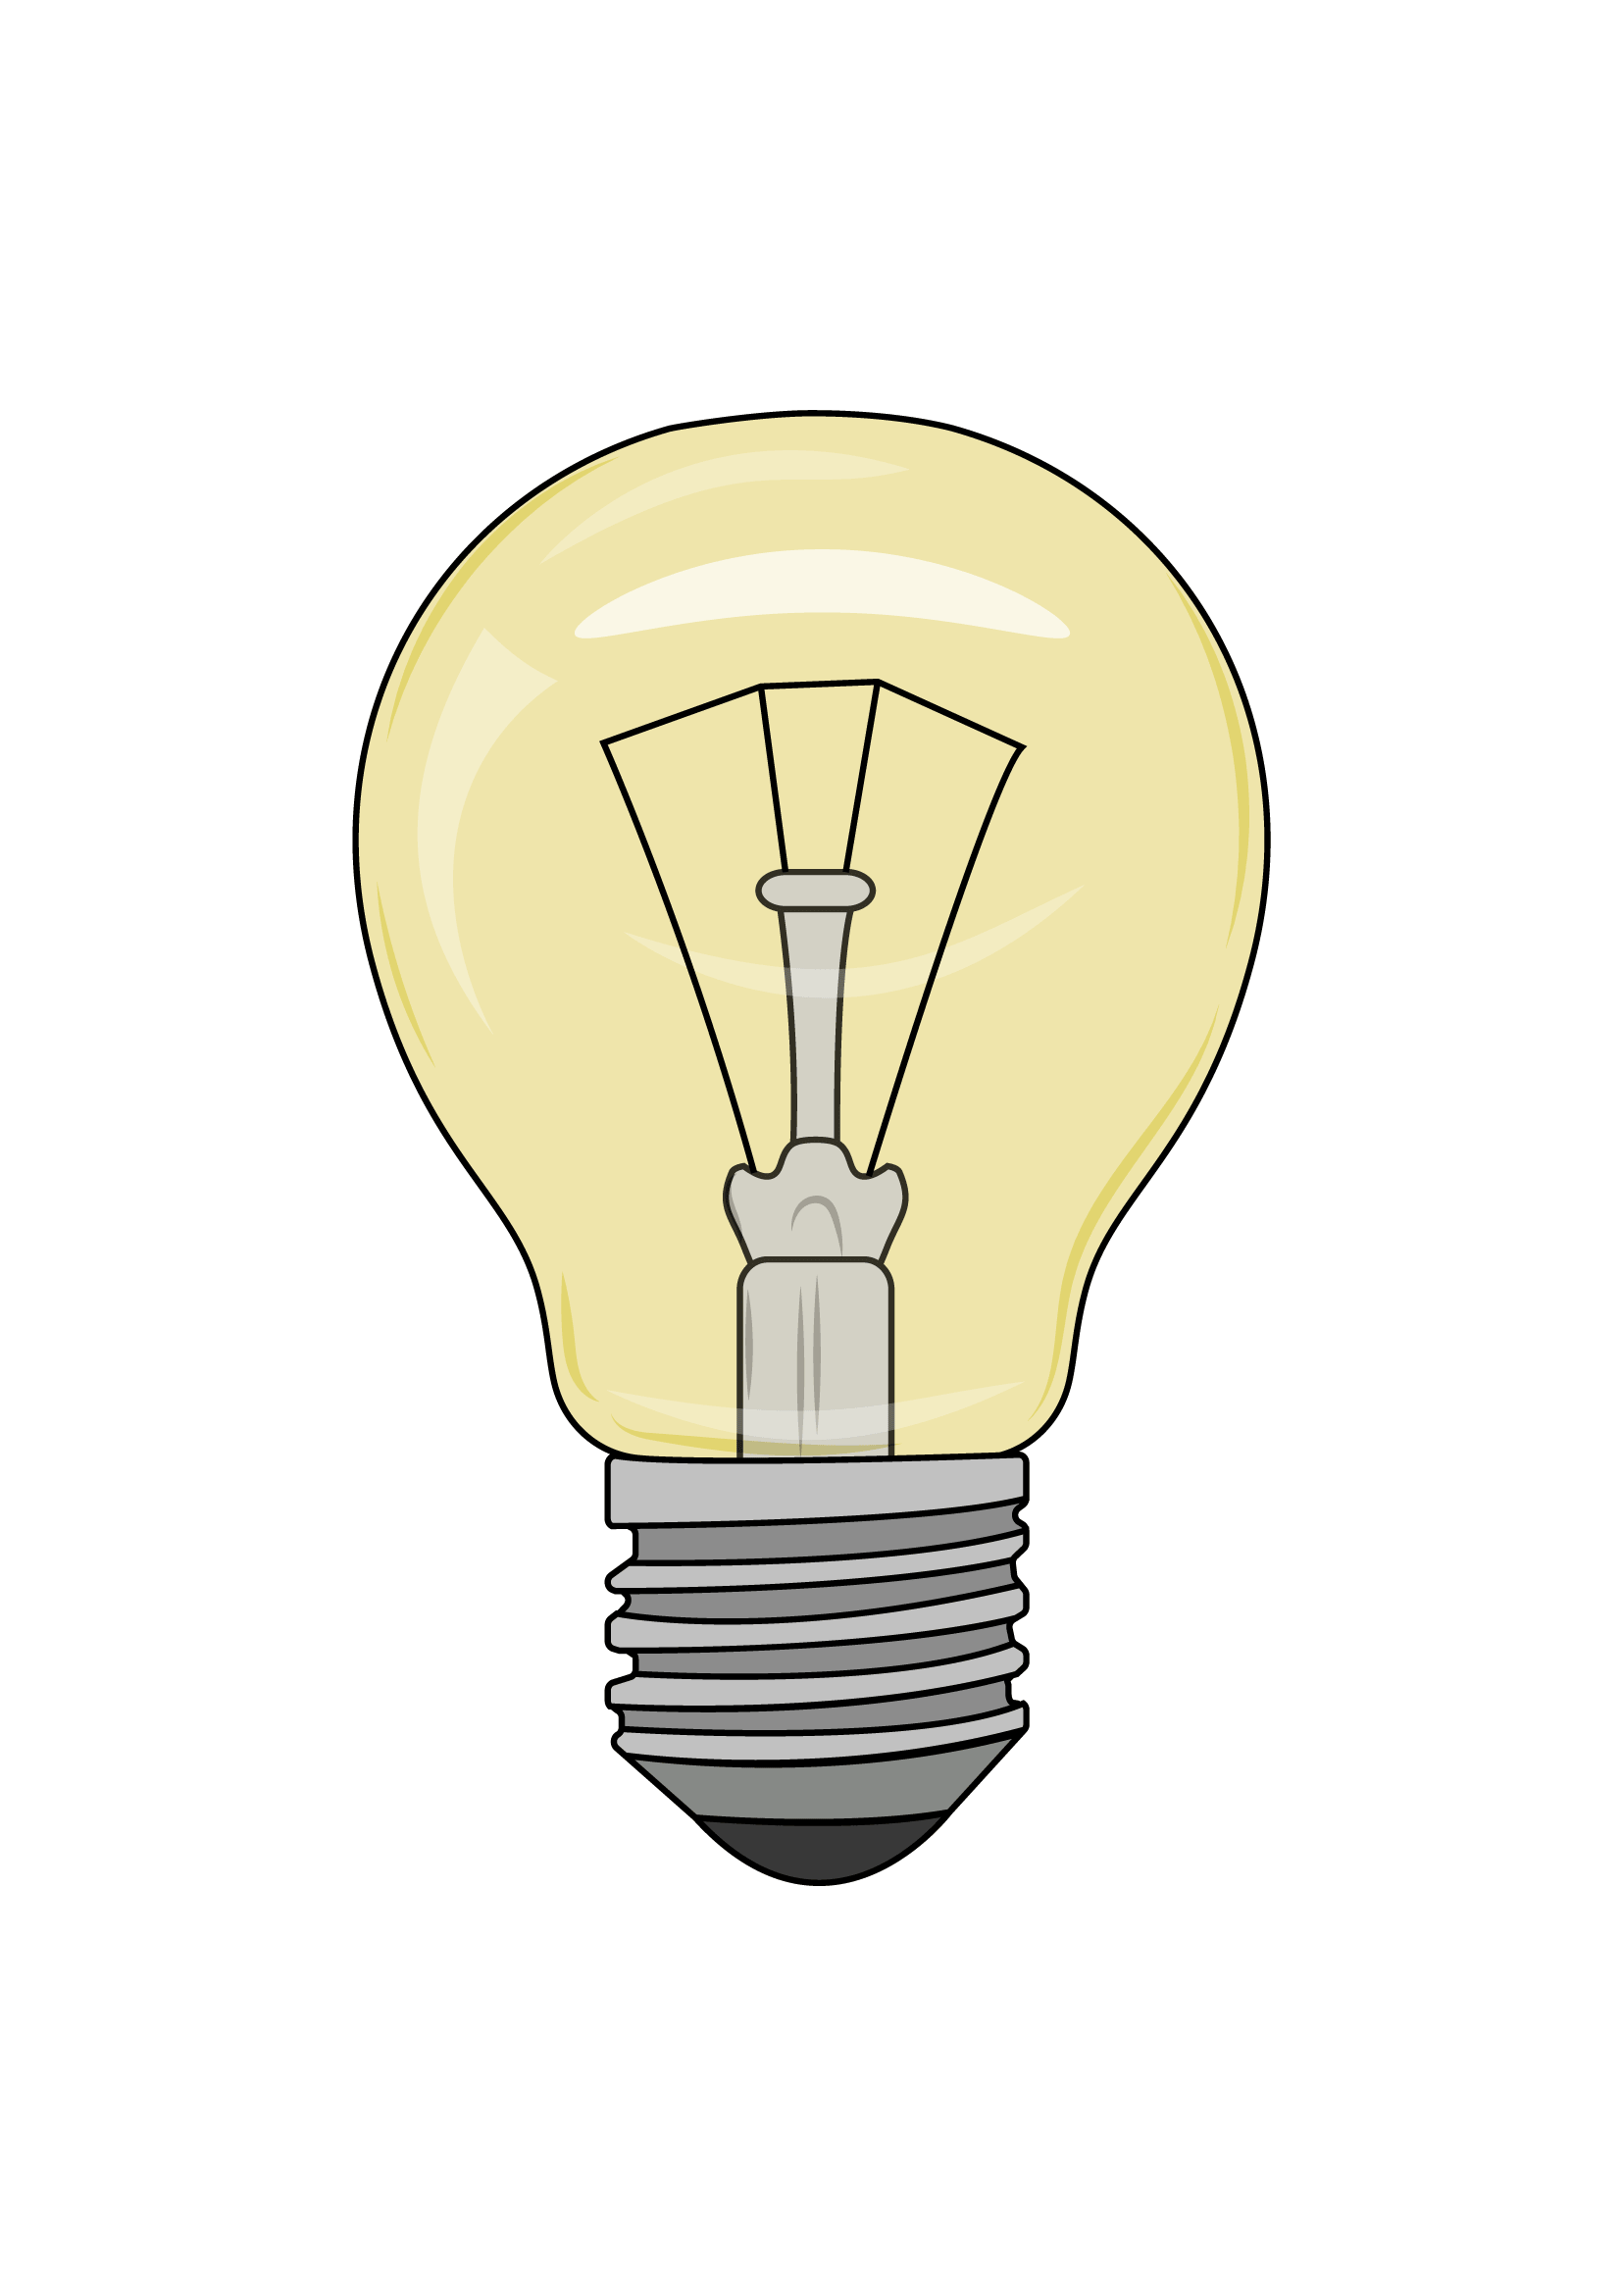 How to Draw A Light Bulb Step by Step Printable